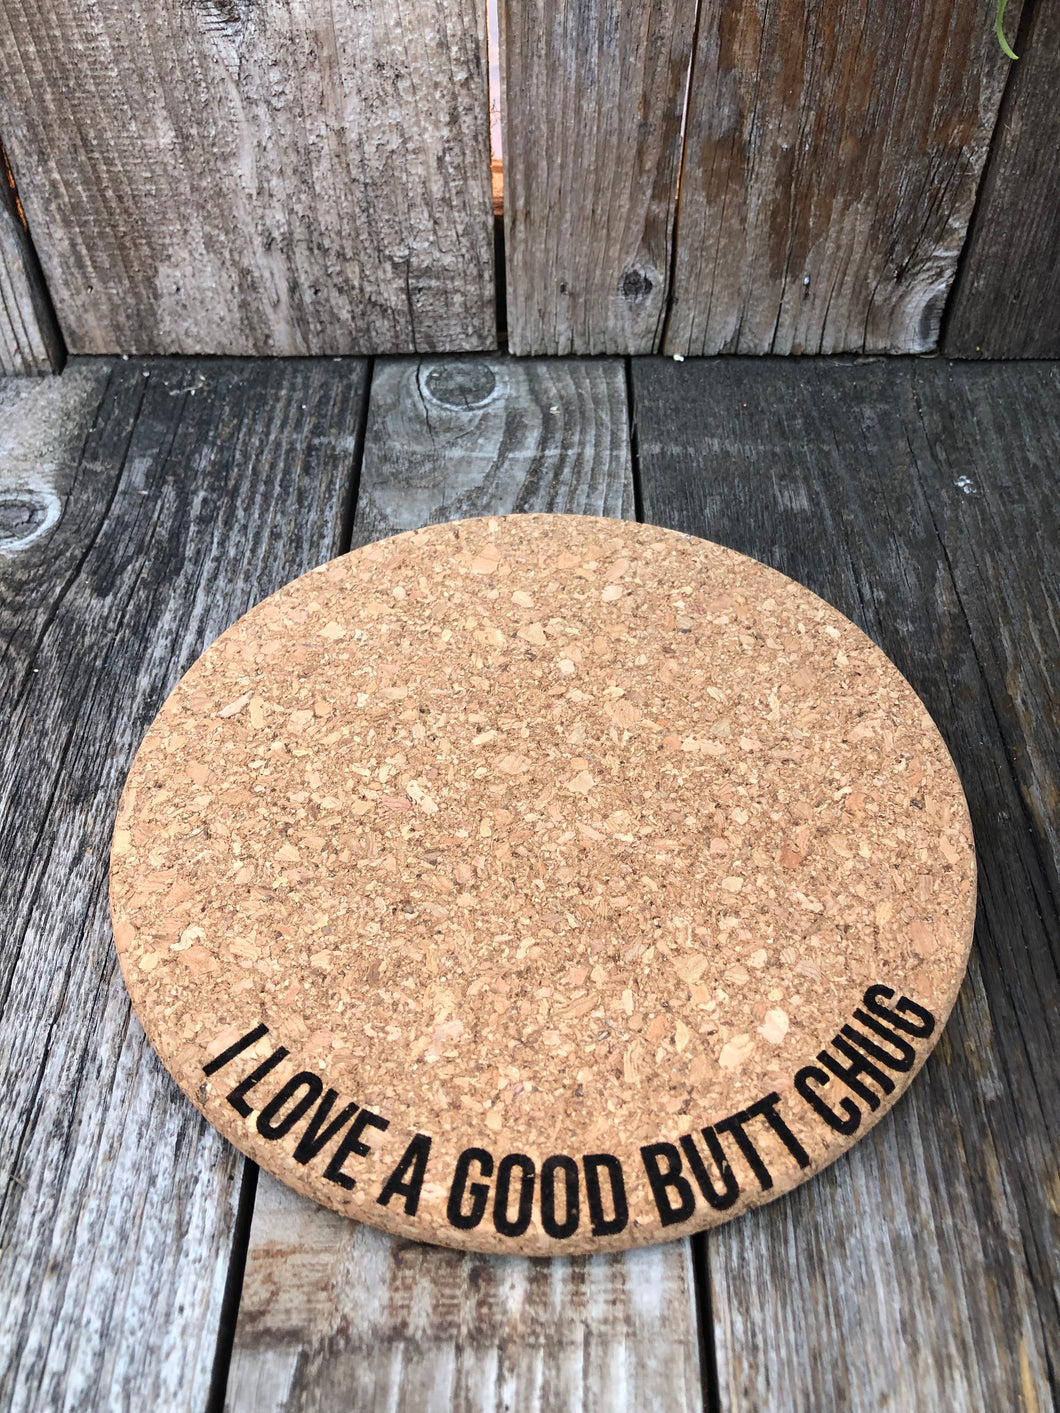 I Love a Good Butt Chug Cork Plant Mat - Engraved Cork Round - Cork Bottom - No Plastic or Rubber - All Natural Material